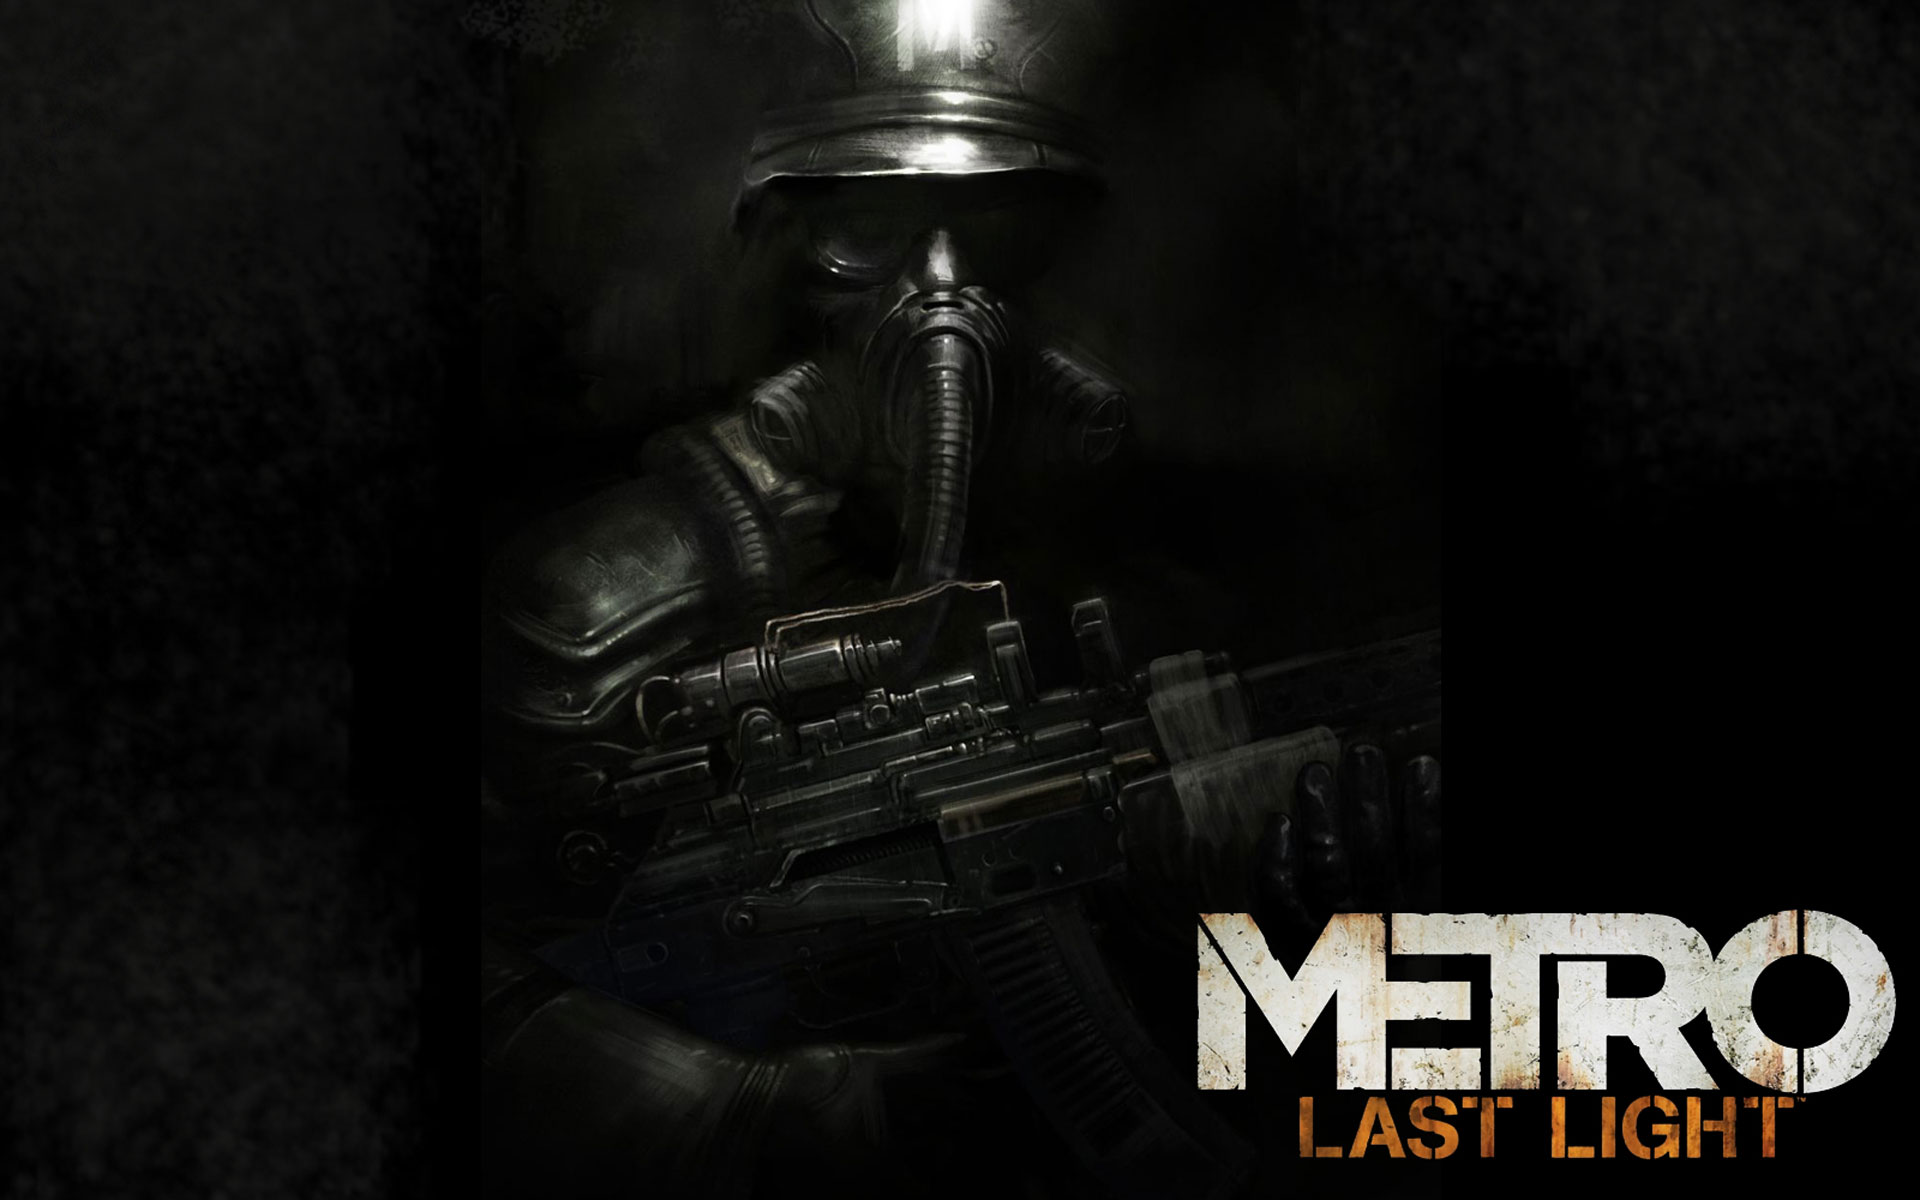 Metro Last Light is the direct first person shooter sequel to Metro